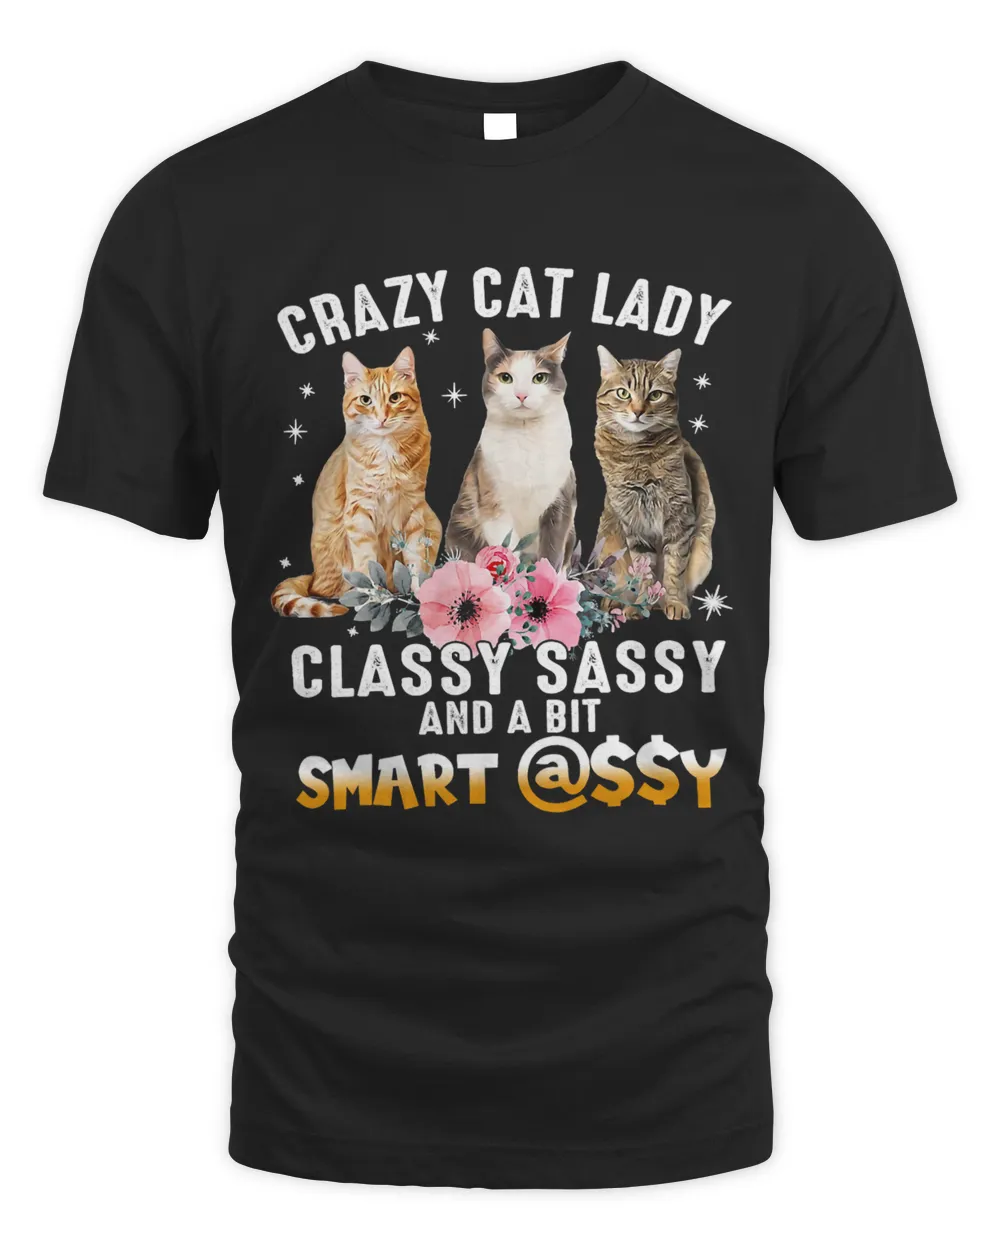 Funny Crazy Cat Lazy Classy Sassy And A Bit Smart Cassy Cute 185